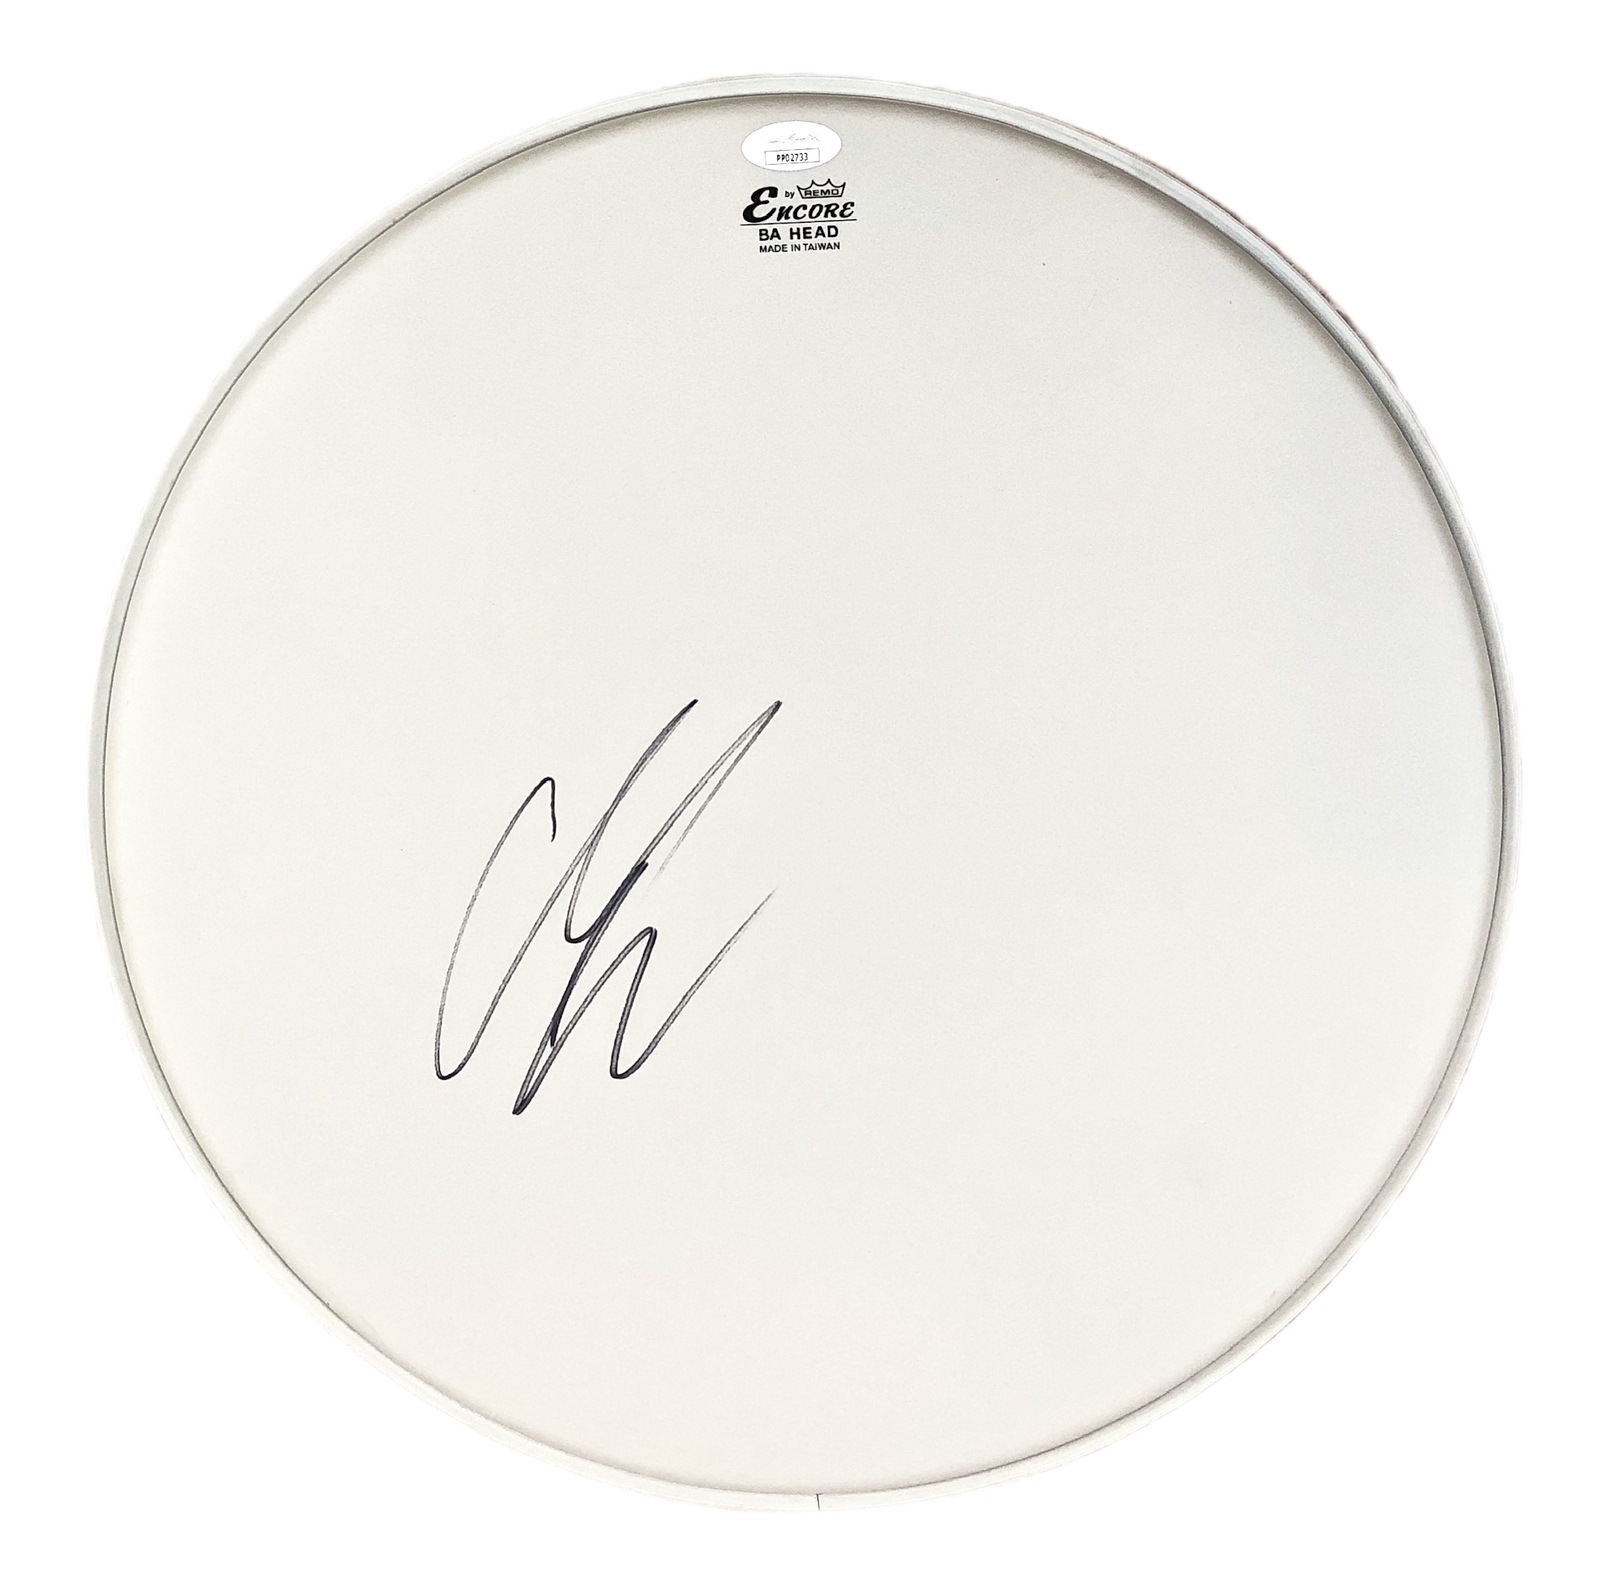 CHARLES KELLEY Autographed SIGNED DRUMHEAD 14 1/2" LADY ANTEBELLUM LADY A JSA  - $74.99